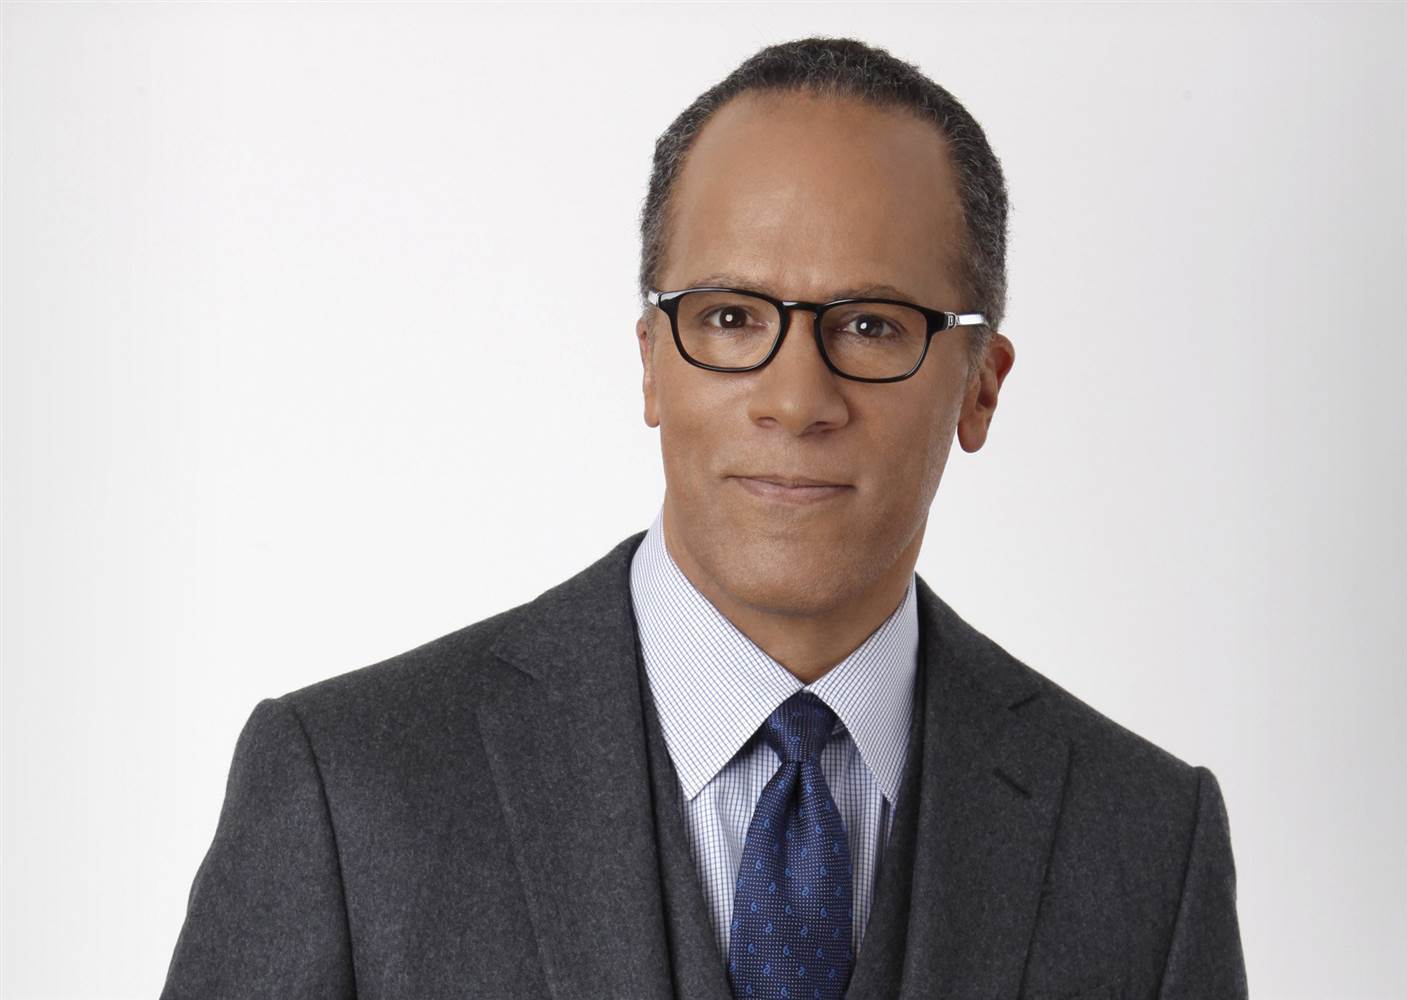 Lester Holt Named Anchor Of 'NBC Nightly News' - NBC News